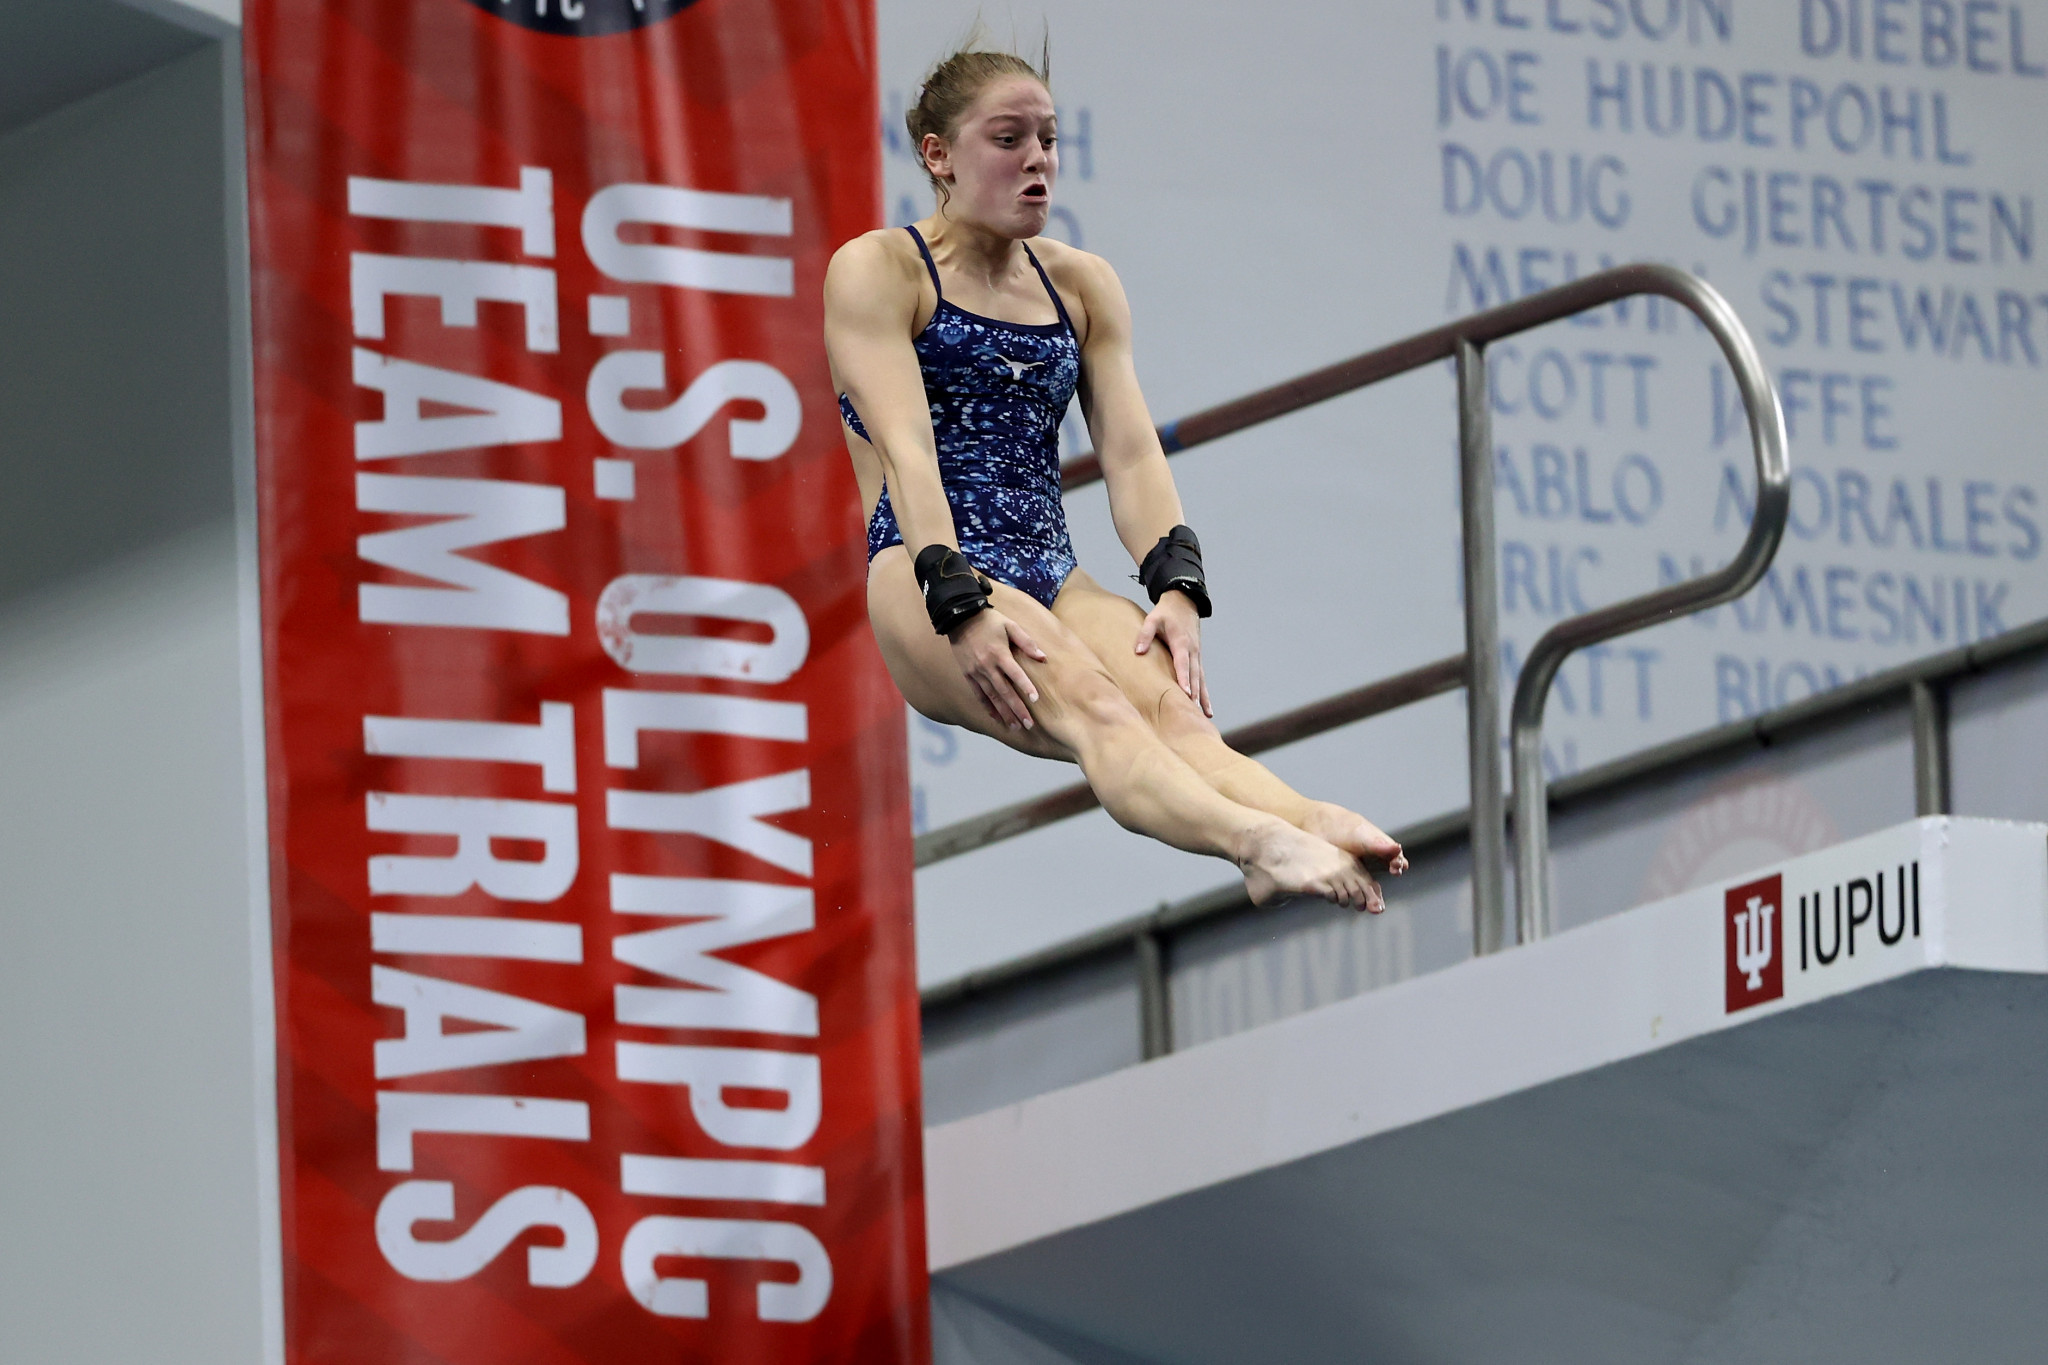 Knoxville to host United States Paris 2024 Olympic diving trials